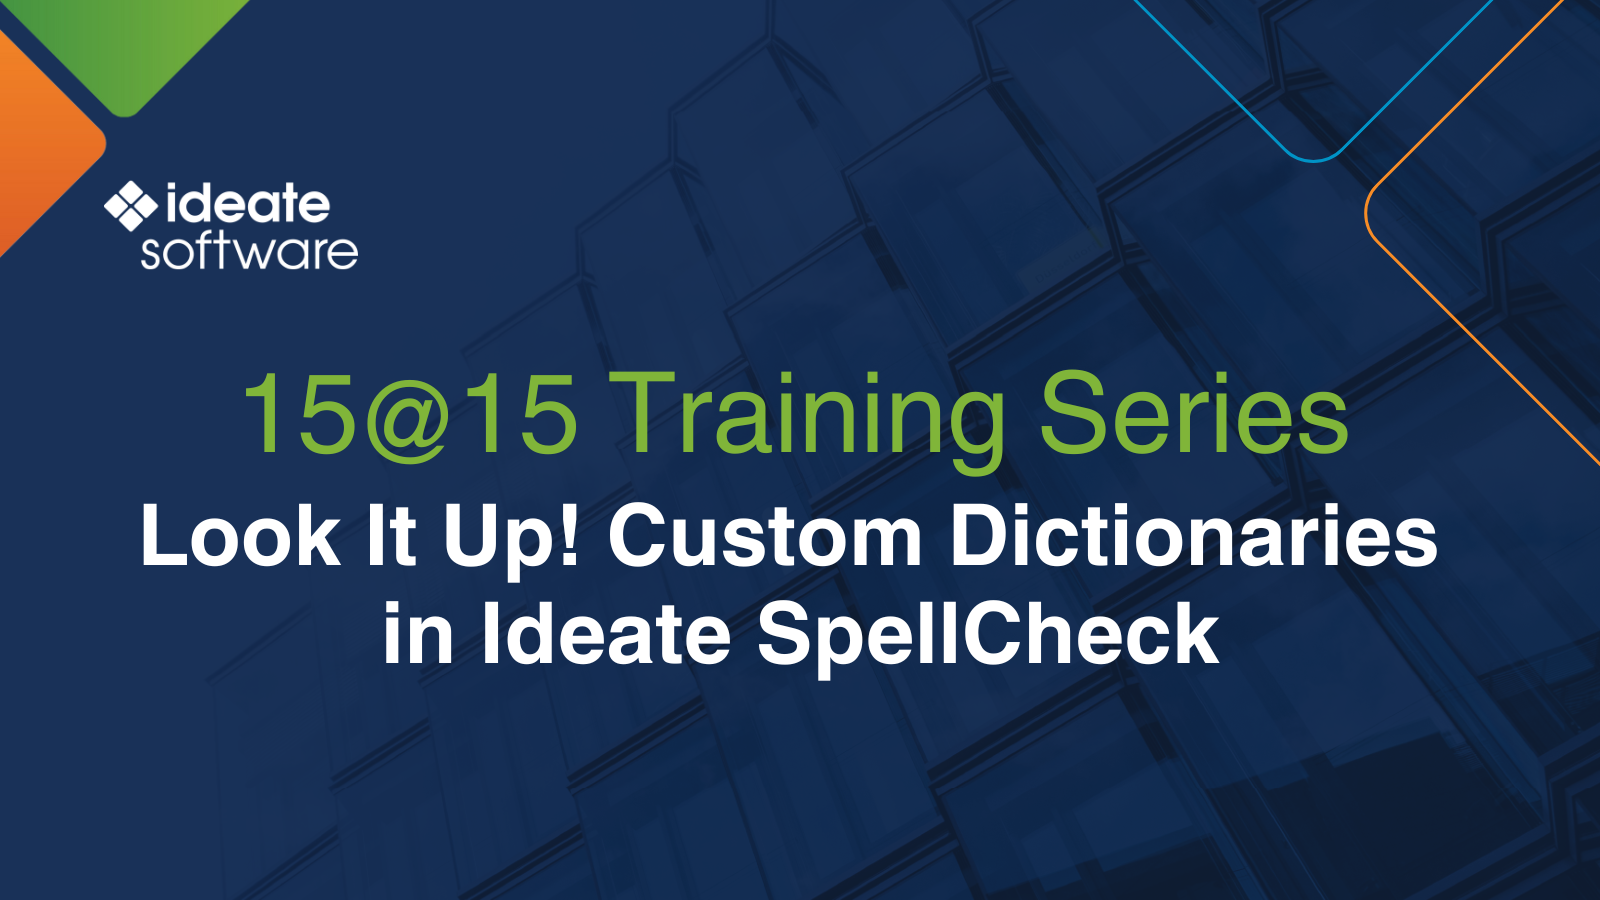 15@15: Look It Up! Custom Dictionaries in Ideate SpellCheck